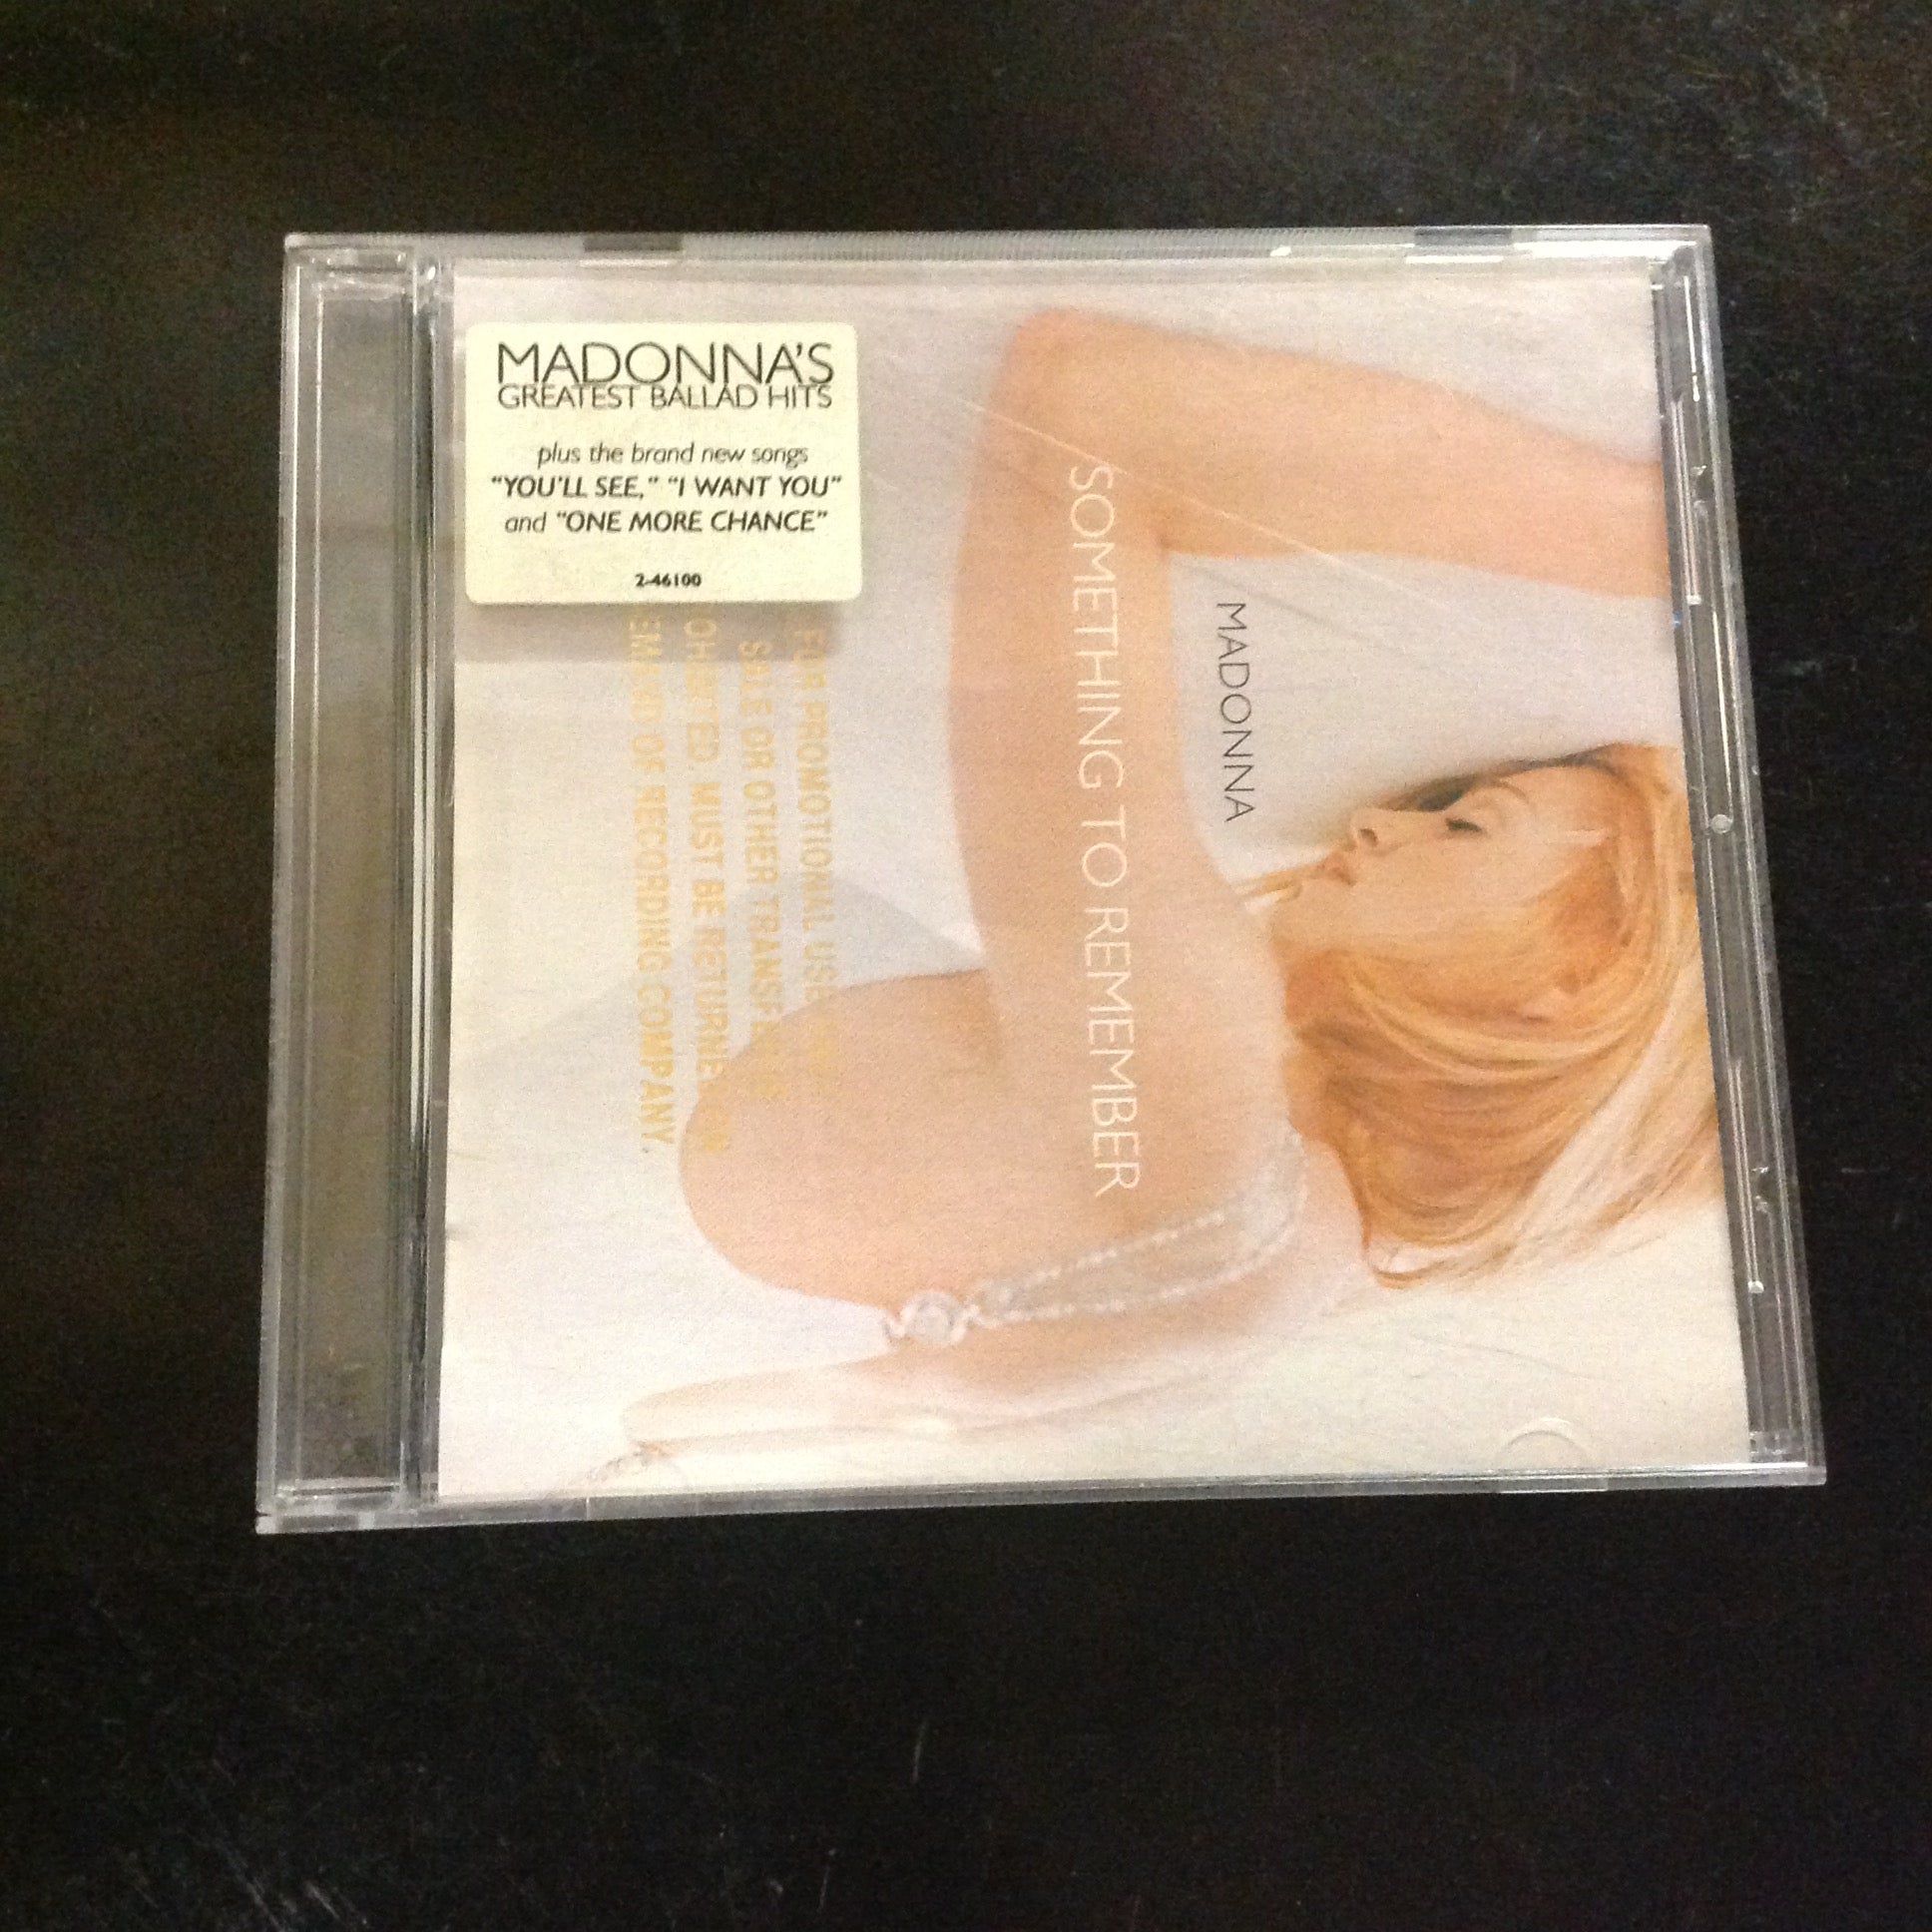 CD Madonna PROMO Greatest Ballad Hits Something To Remember 946100-2